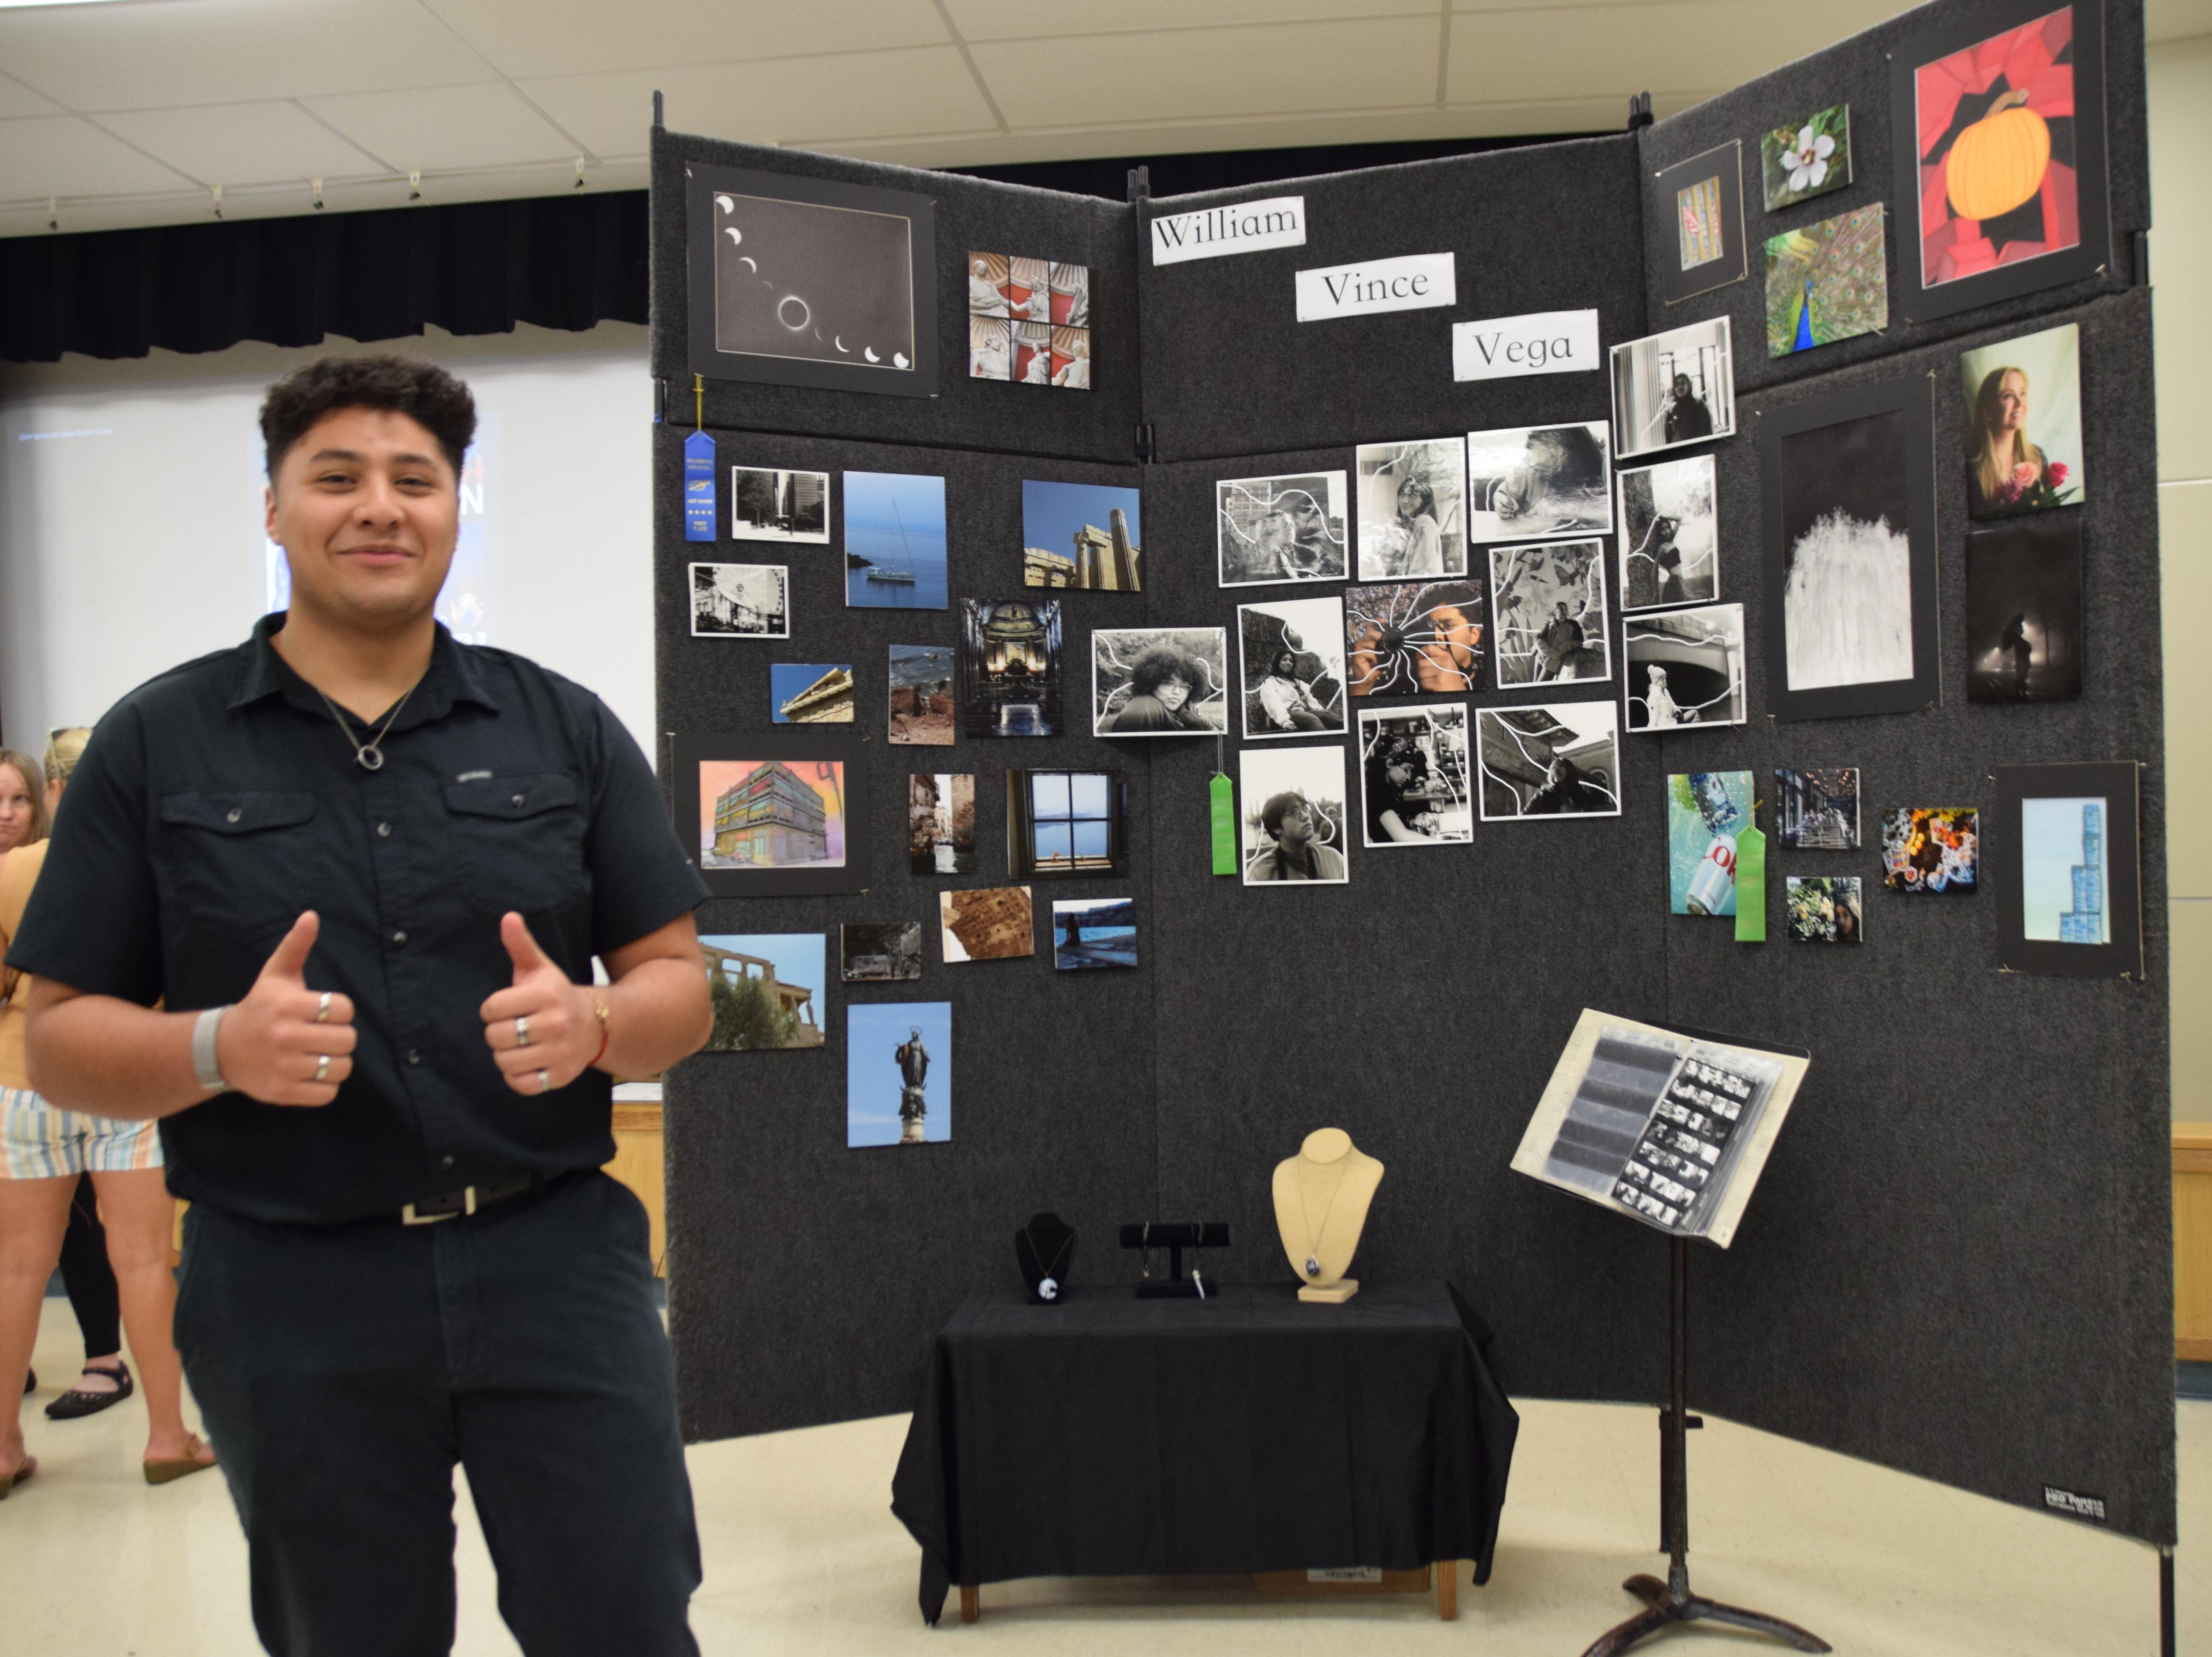 Willowbrook hosts annual Student Art Show/Spring Art Exhibition